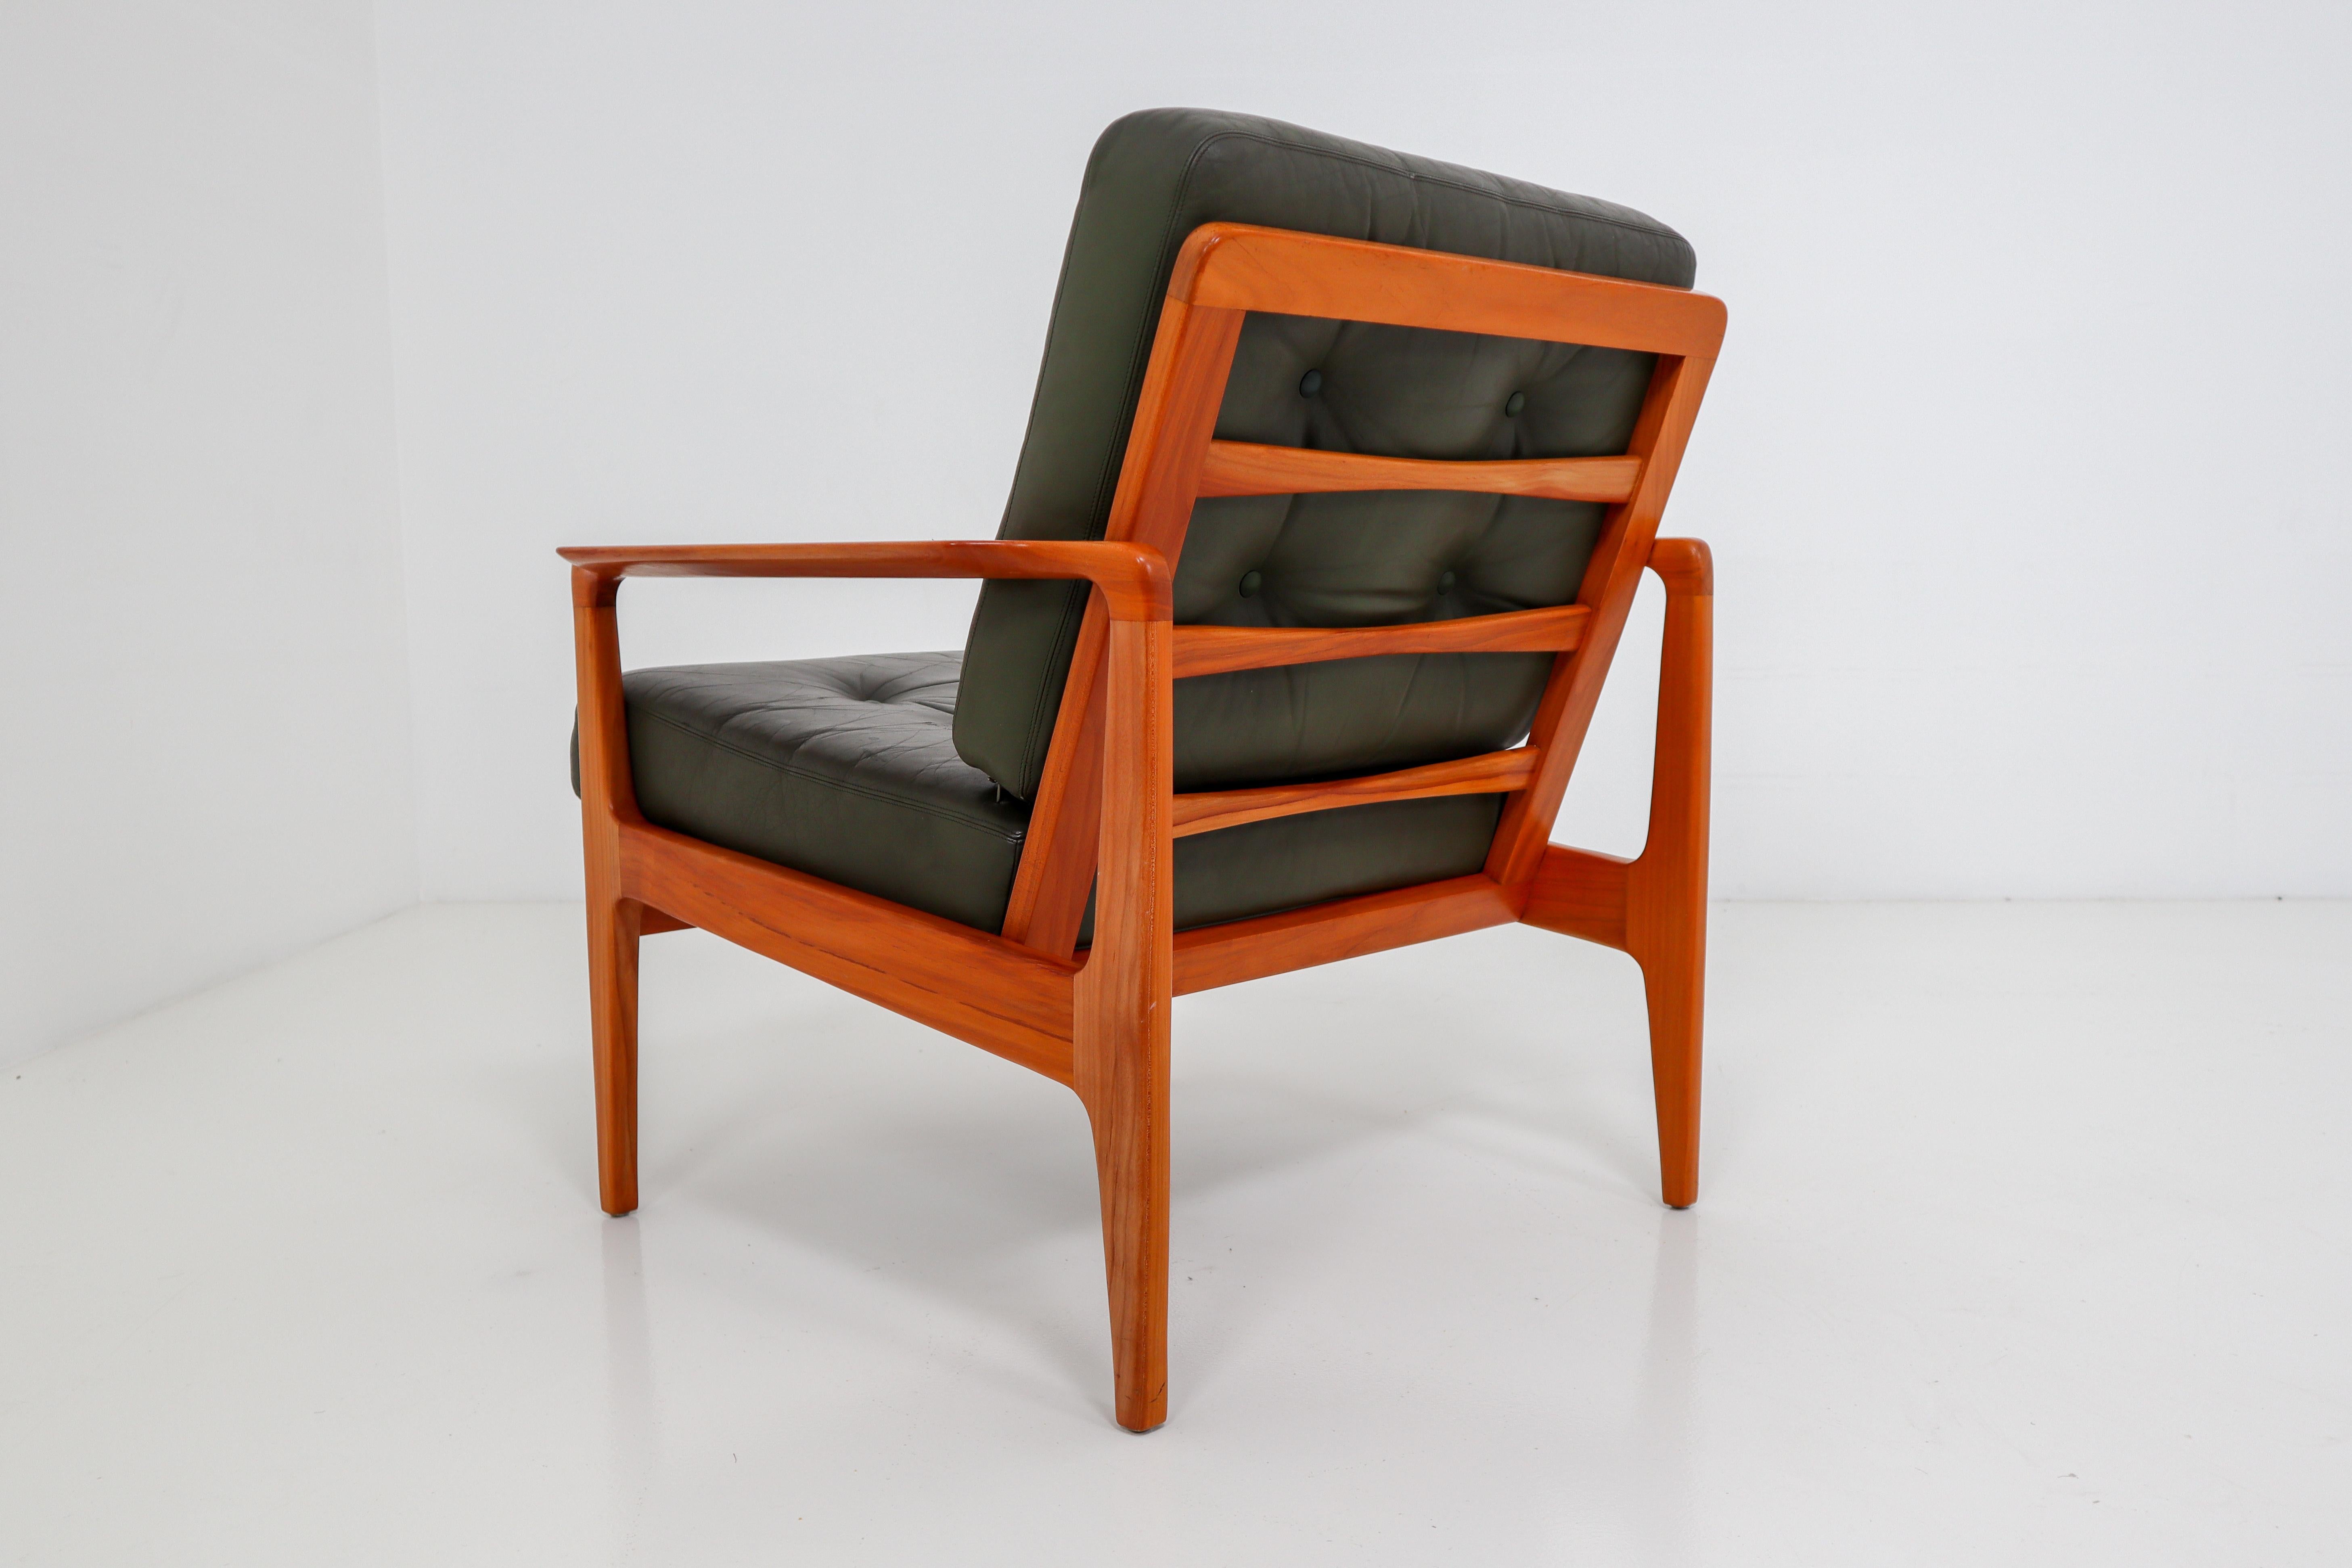 Midcentury Danish lounge chair by Arne Wahl Iversen, 1960s. Original cushion in green leather in very good condition.